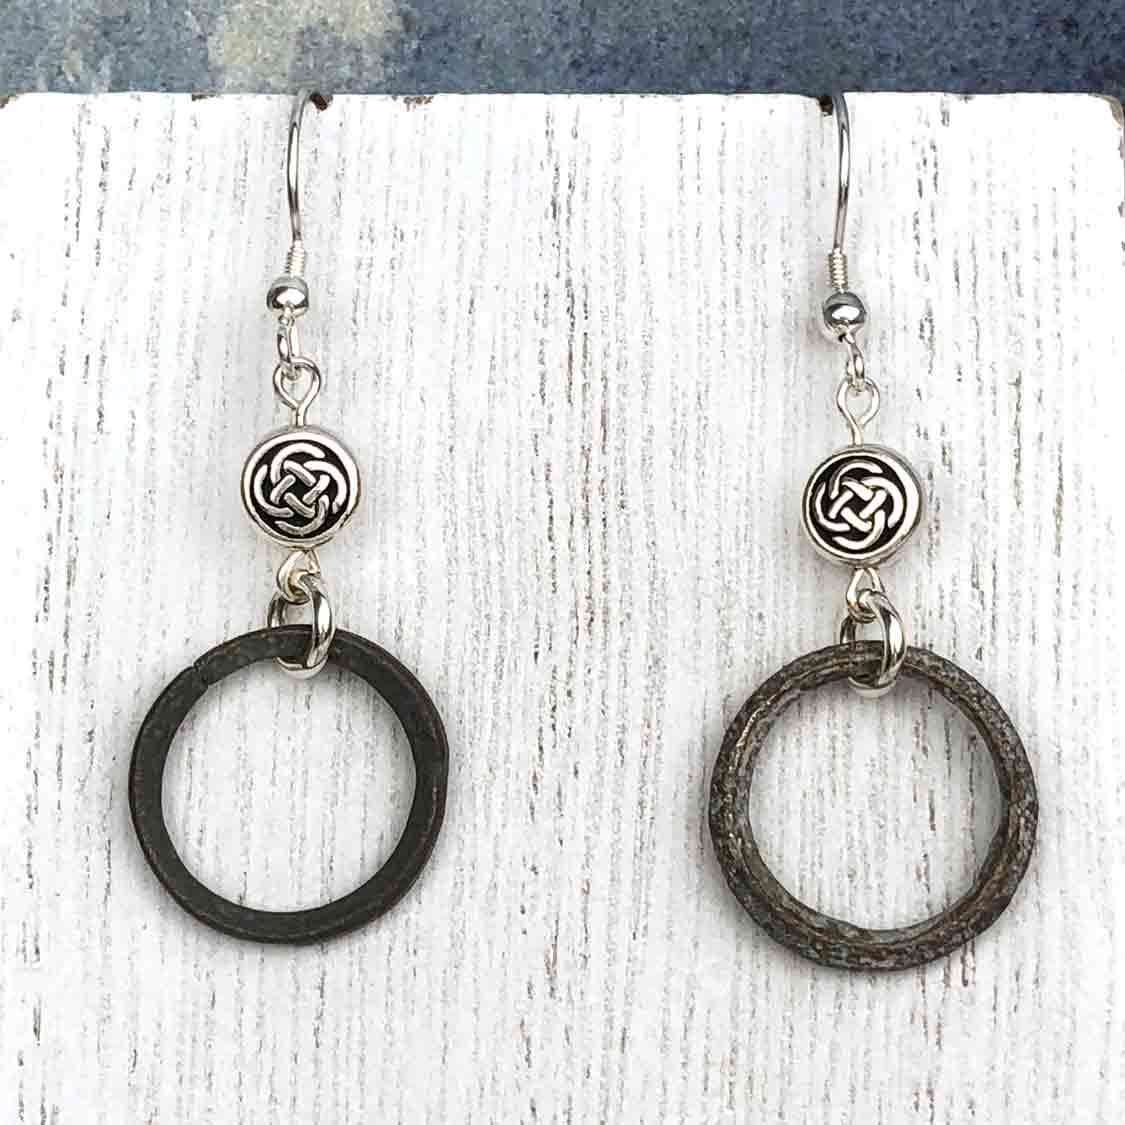 Light to Dark Green Bronze Celtic Ring Money Earrings with Celtic Knot Charms